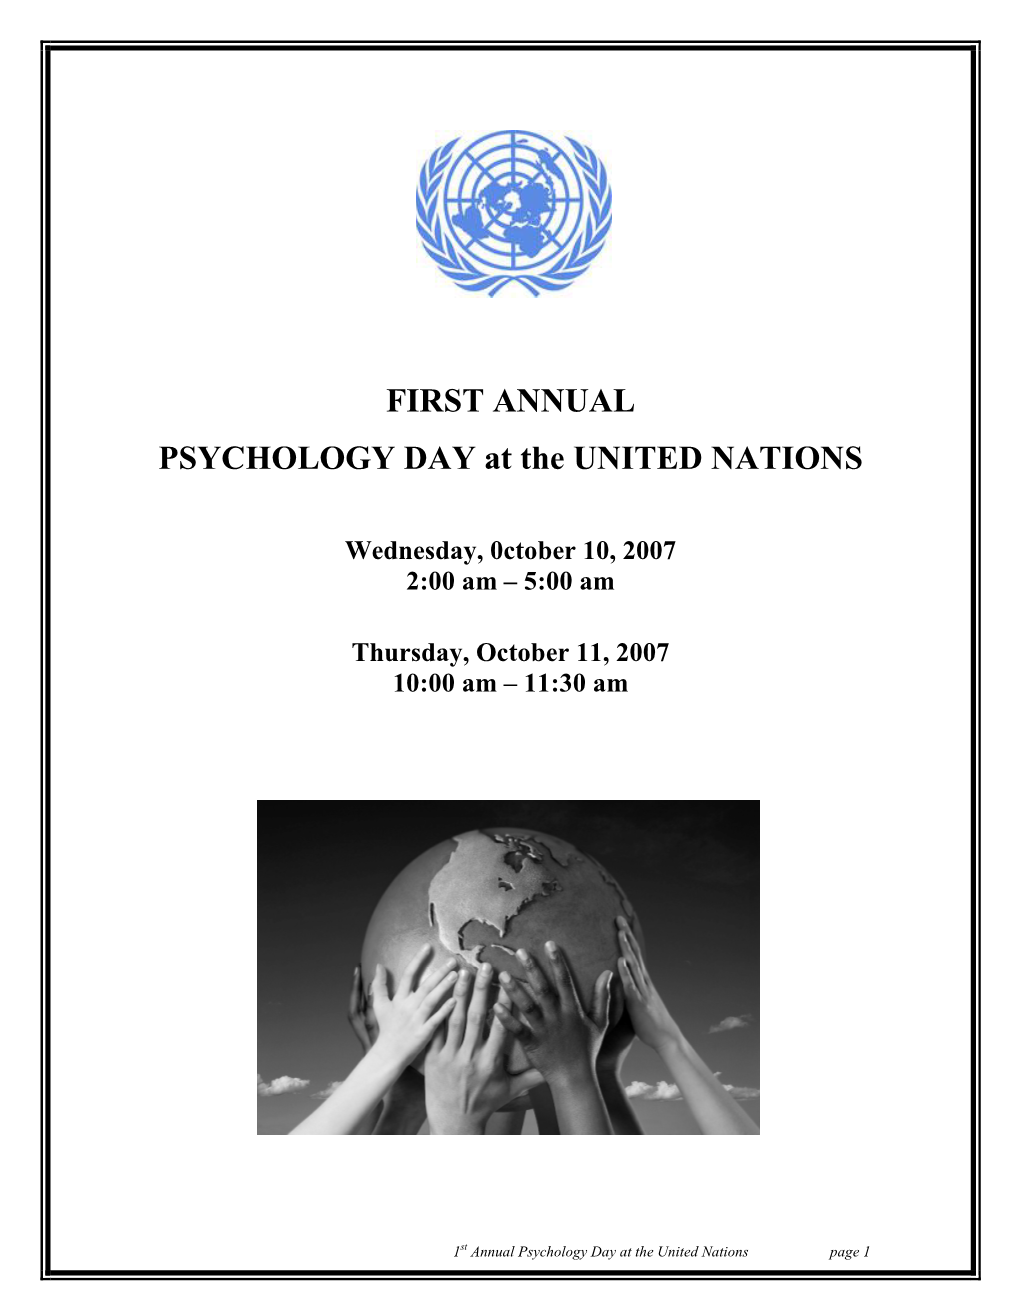 FIRST ANNUAL PSYCHOLOGY DAY at the UNITED NATIONS